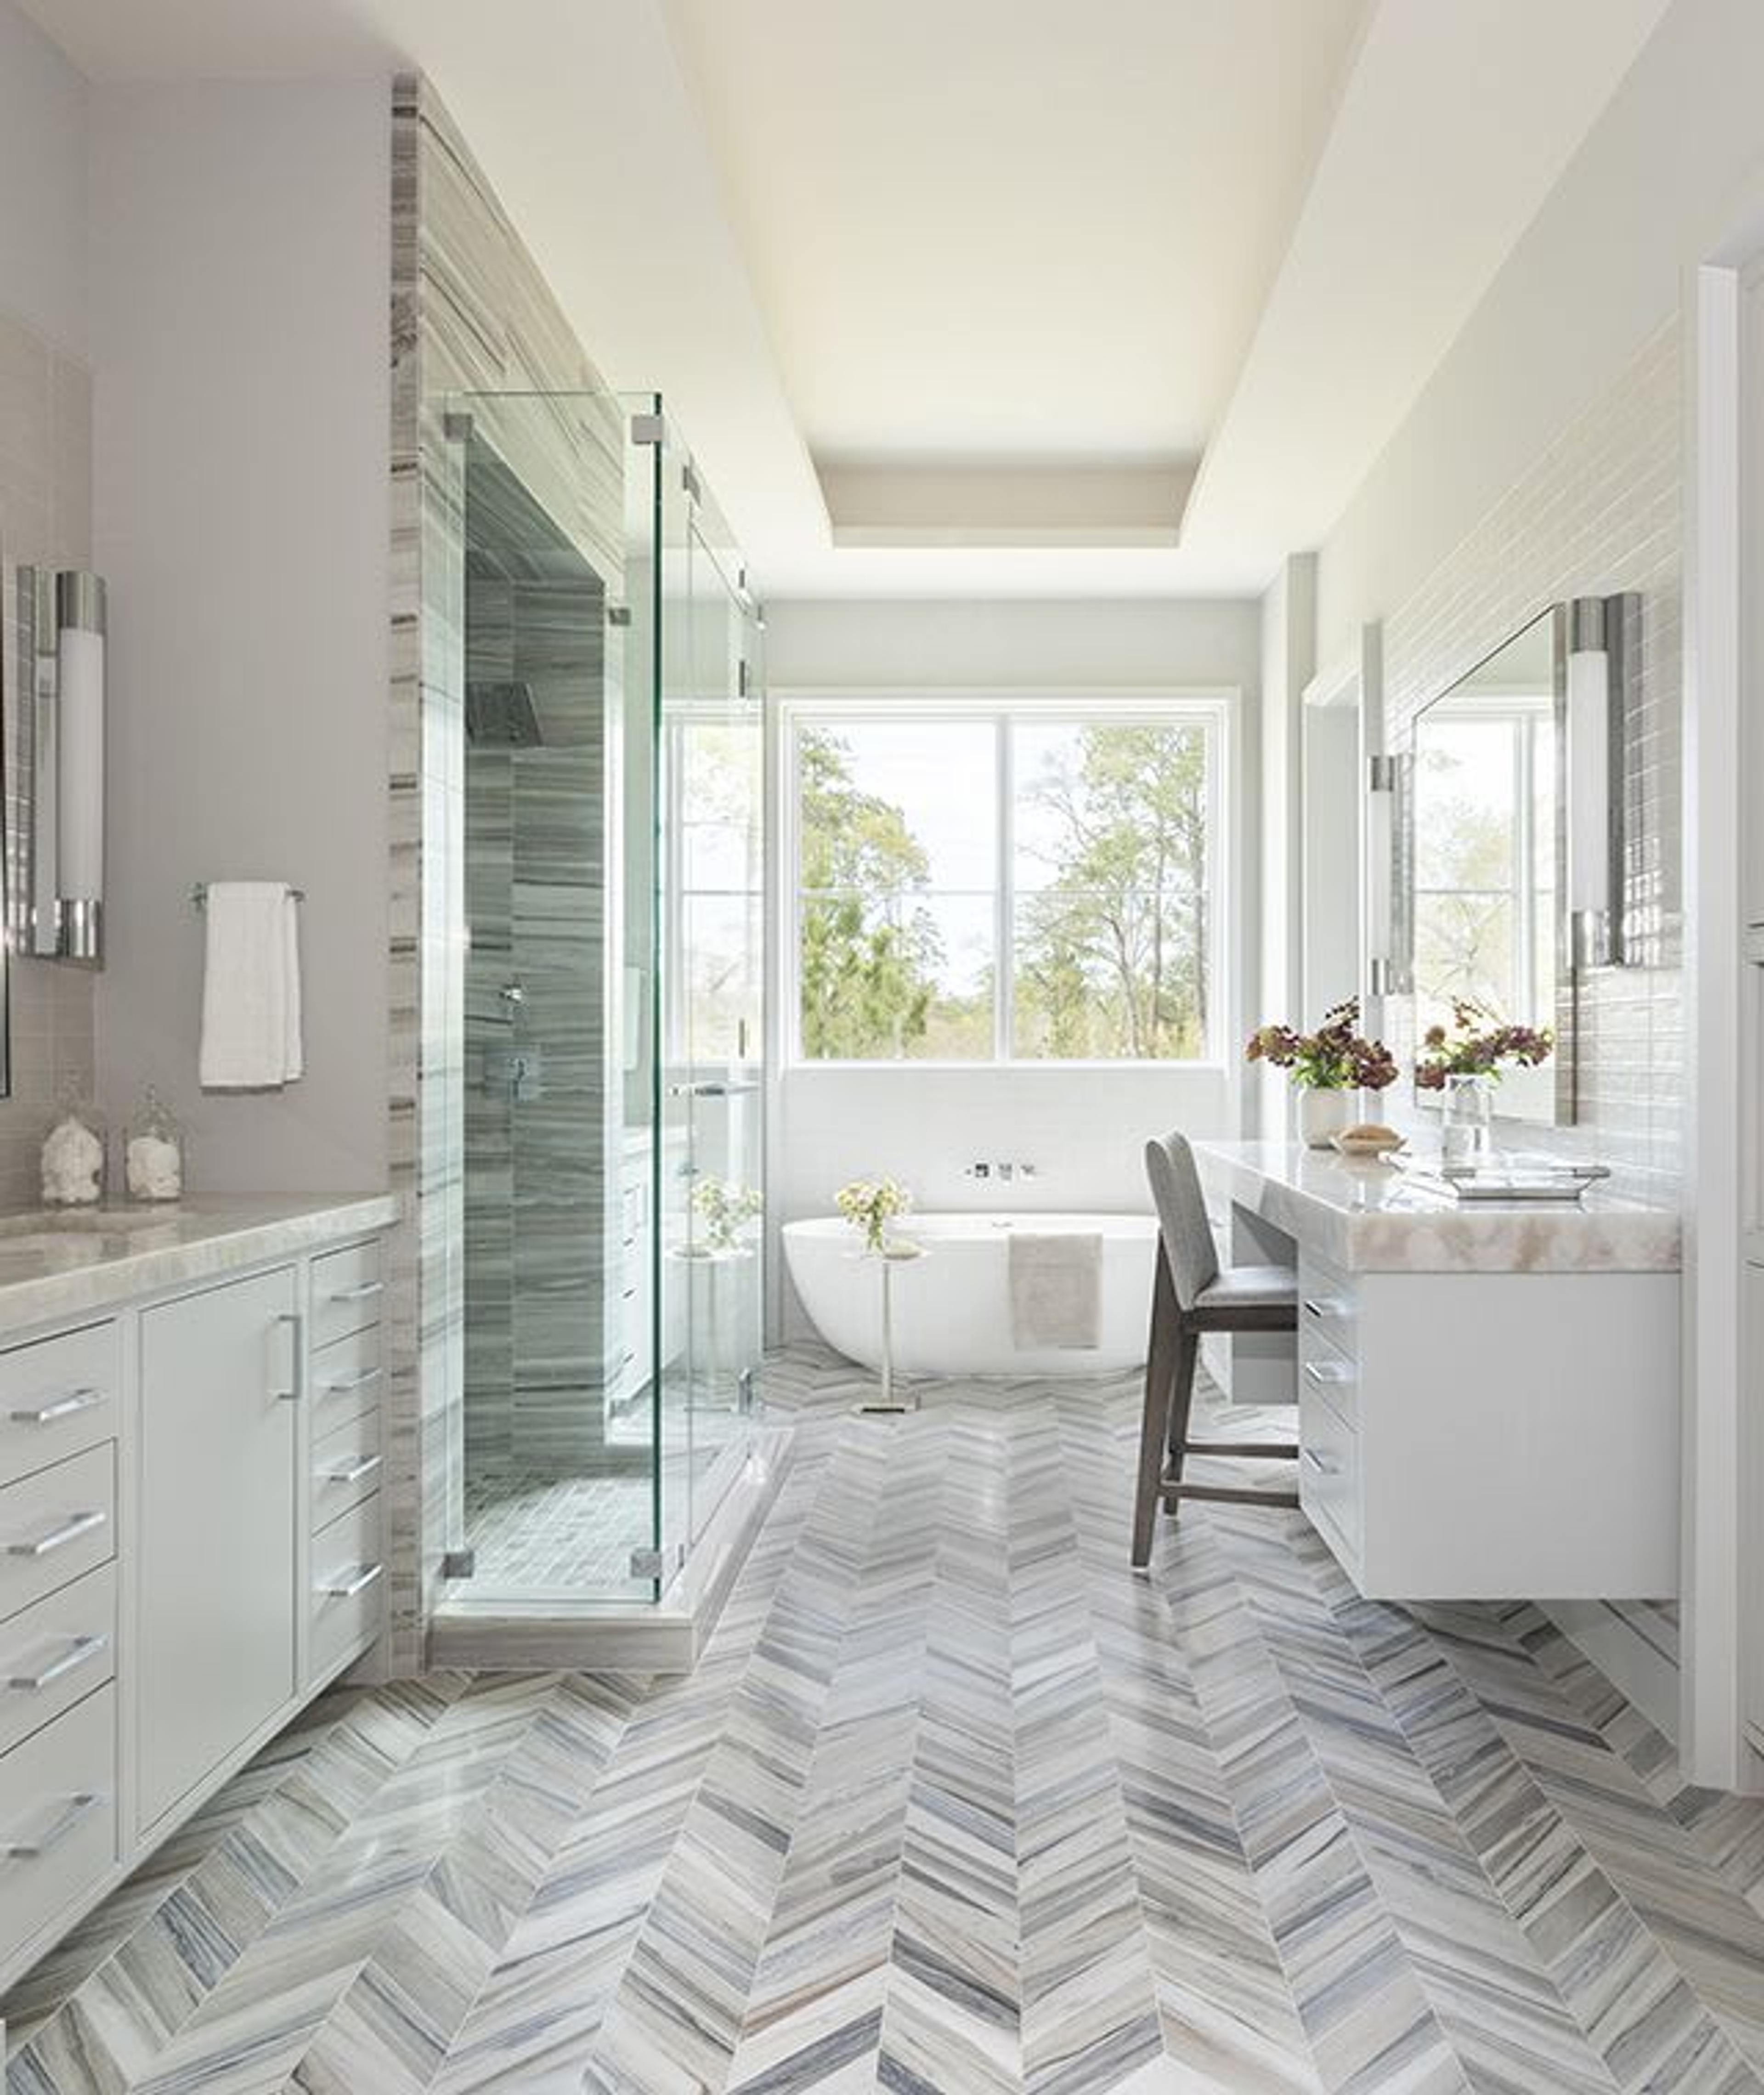 A herringbone marble floor plays with contrast and provides a runway to the double vanities and soaking tub in this spa-inspired primary bath.